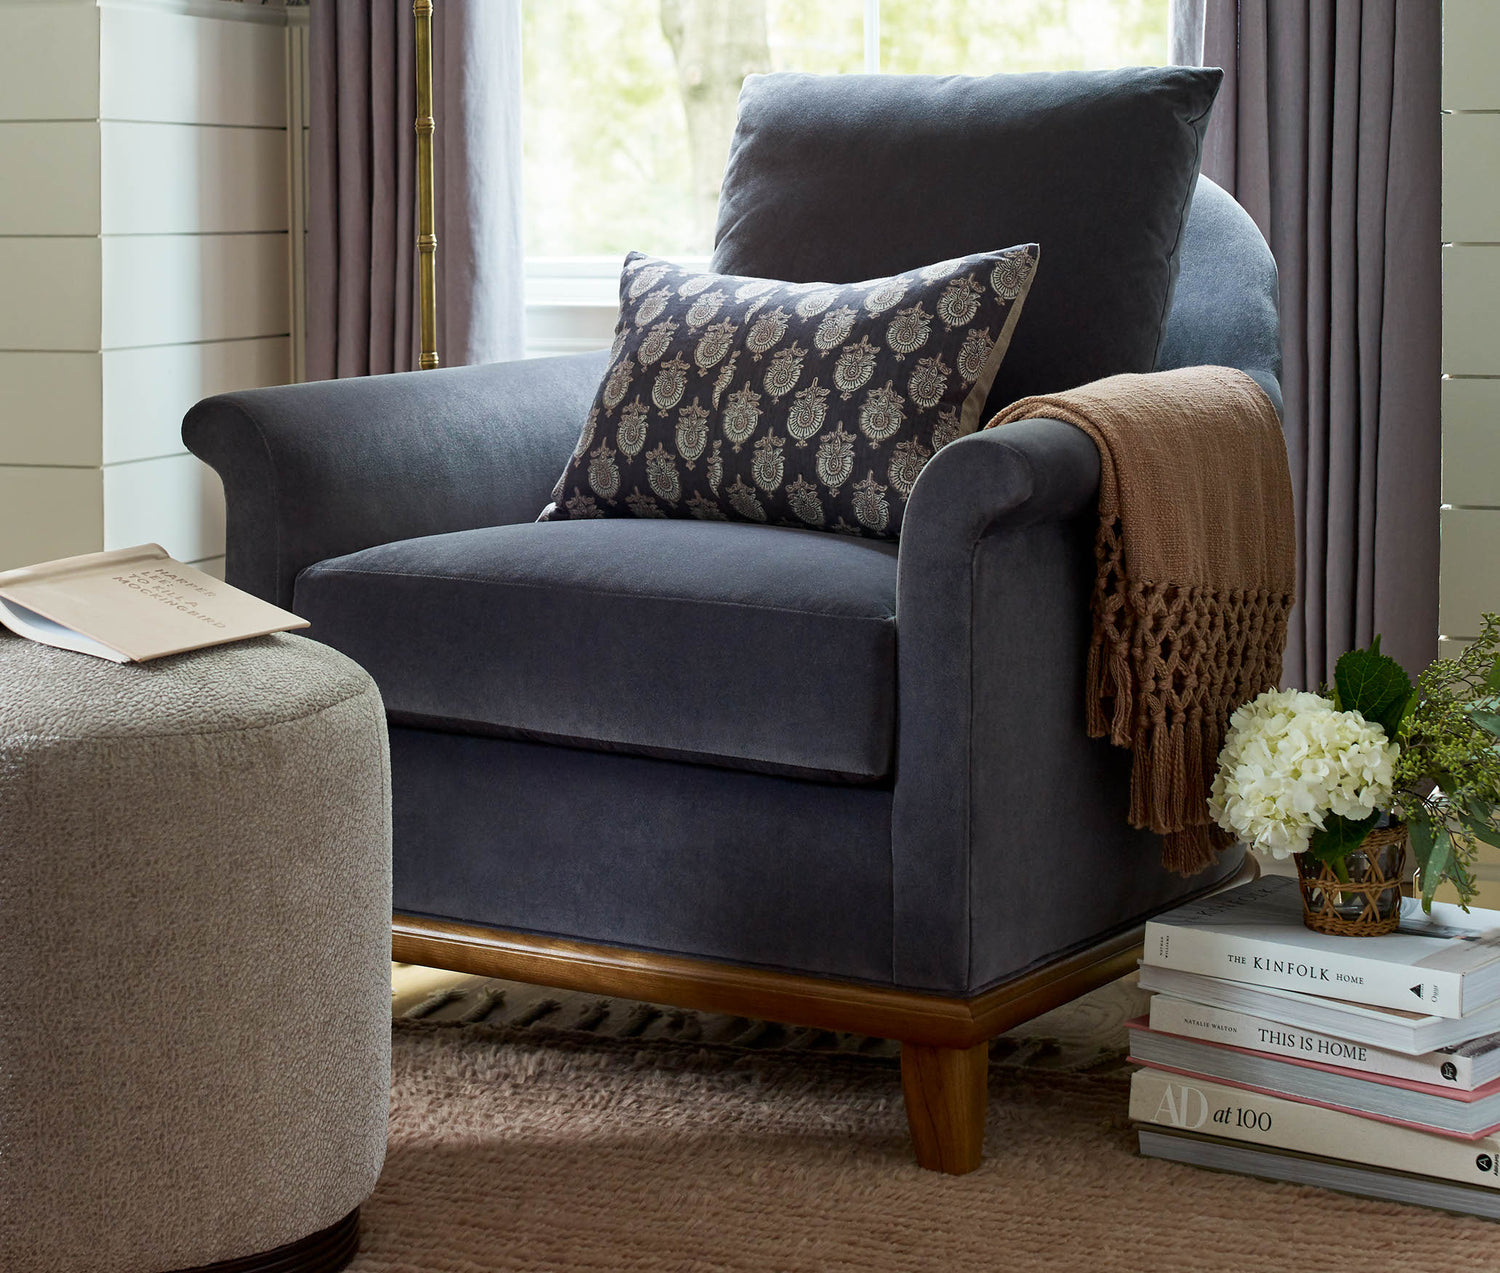 Lifestyle of a navy blue fabric Martine Chair with a printed accent pillow on it and a brown throw blanket draped over one arm